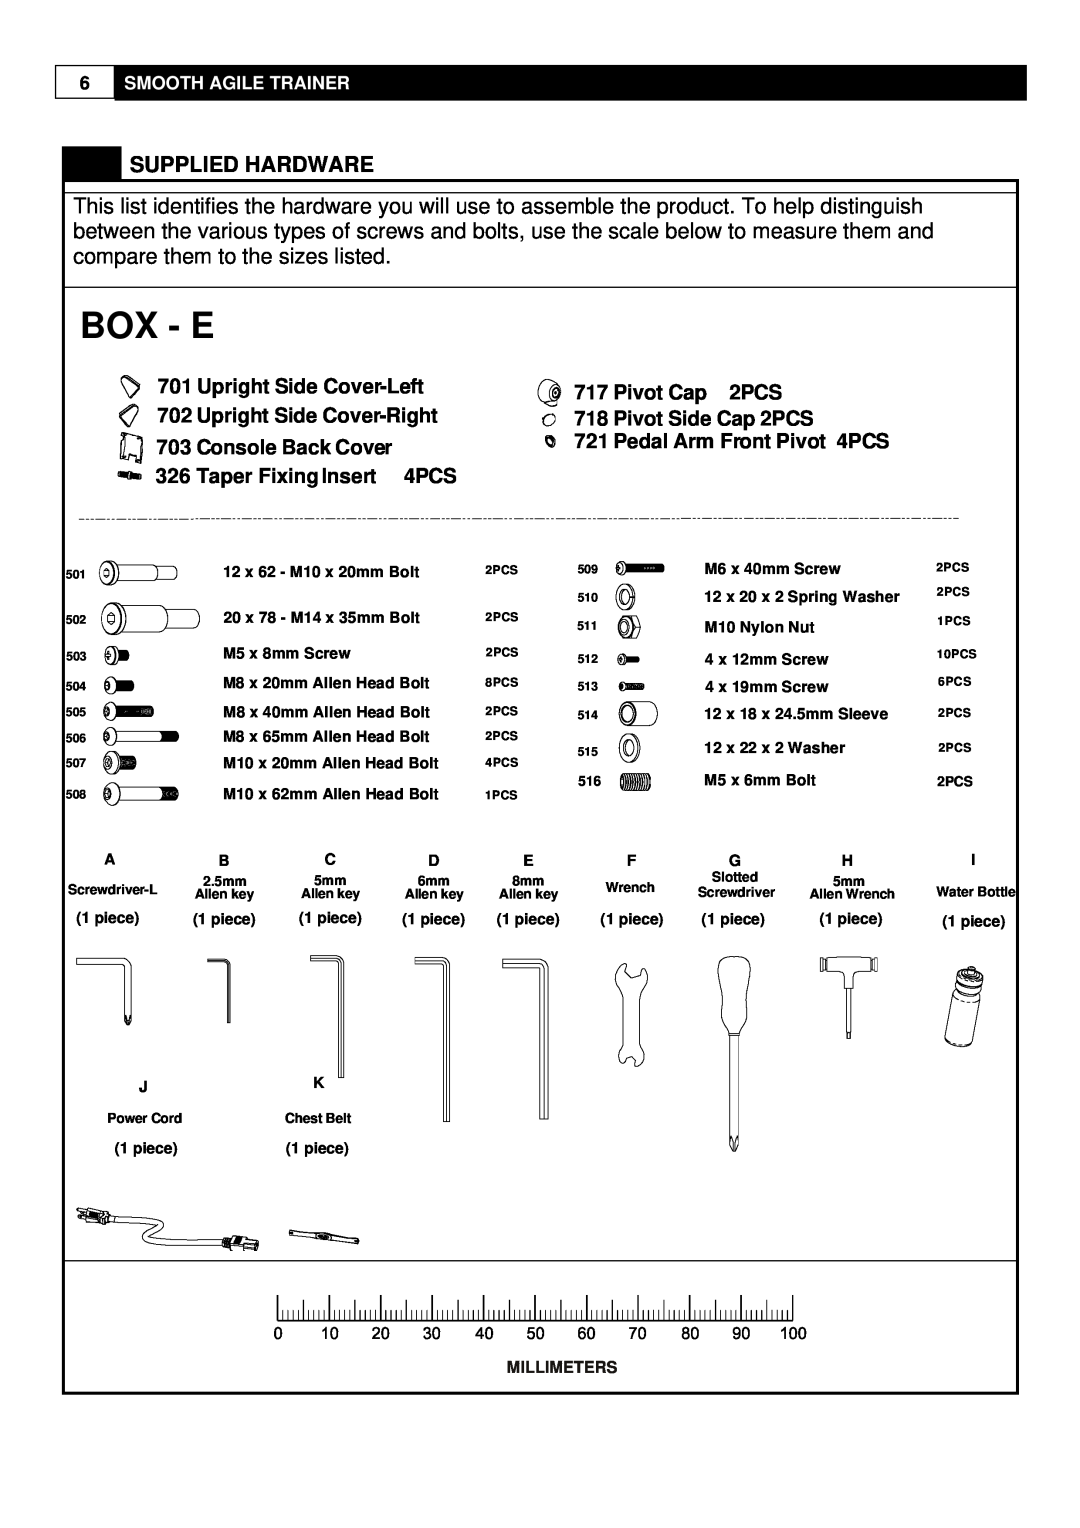 Smooth Fitness 9.25X user manual Box - E, Supplied Hardware, Upright Side Cover-Left 702 Upright Side Cover-Right 